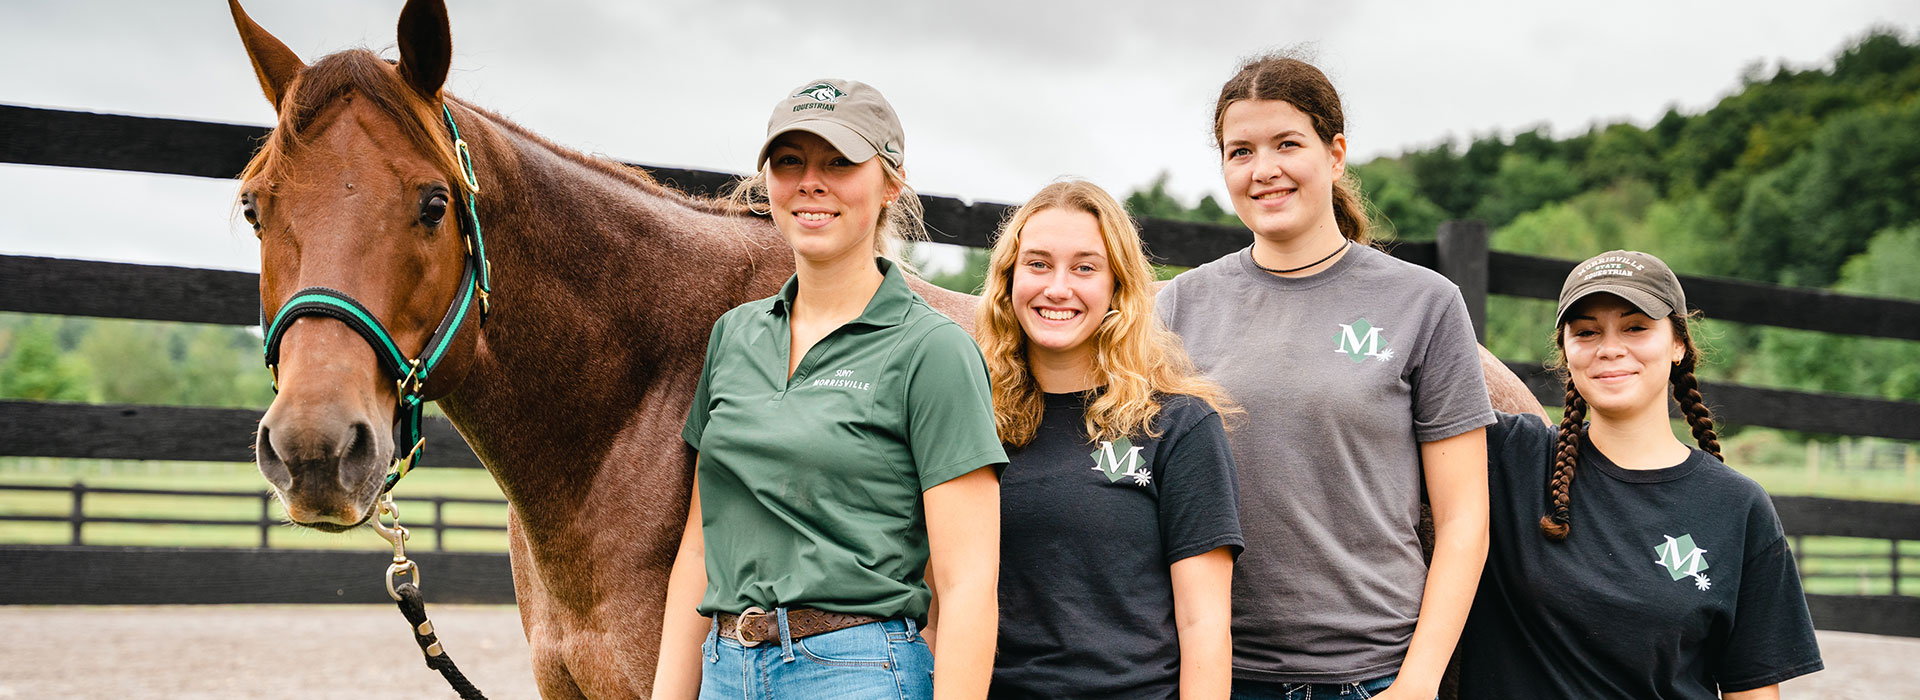 Posing with Finn are, from left, equine students Mak Park,Victoria Eqstein, Carli Potter and Gianna Auriemma.